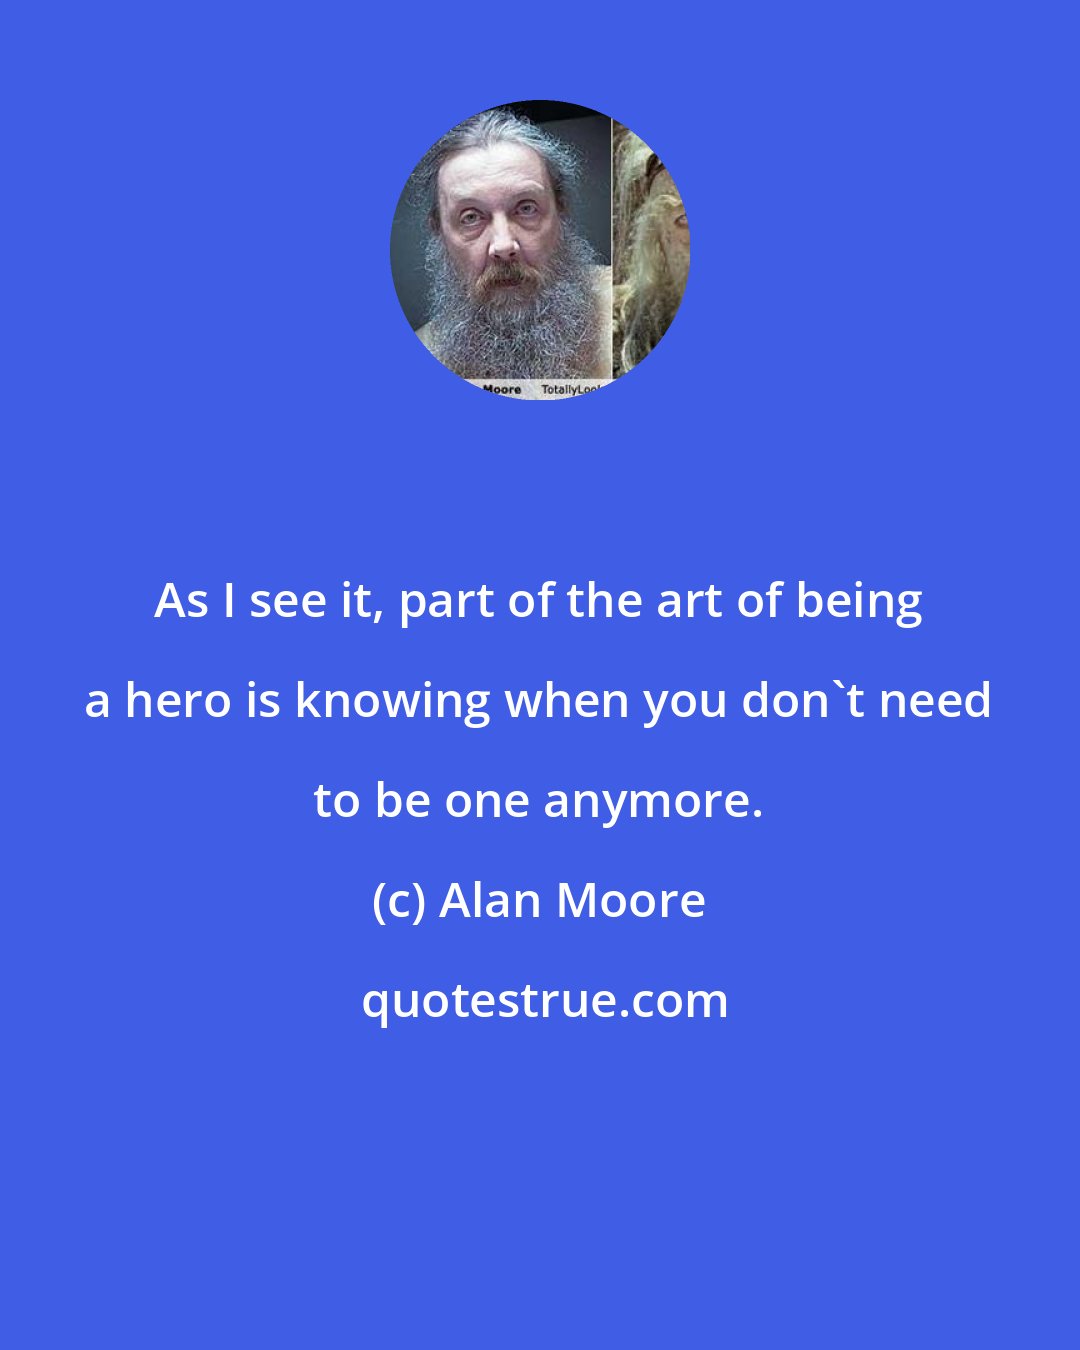 Alan Moore: As I see it, part of the art of being a hero is knowing when you don't need to be one anymore.